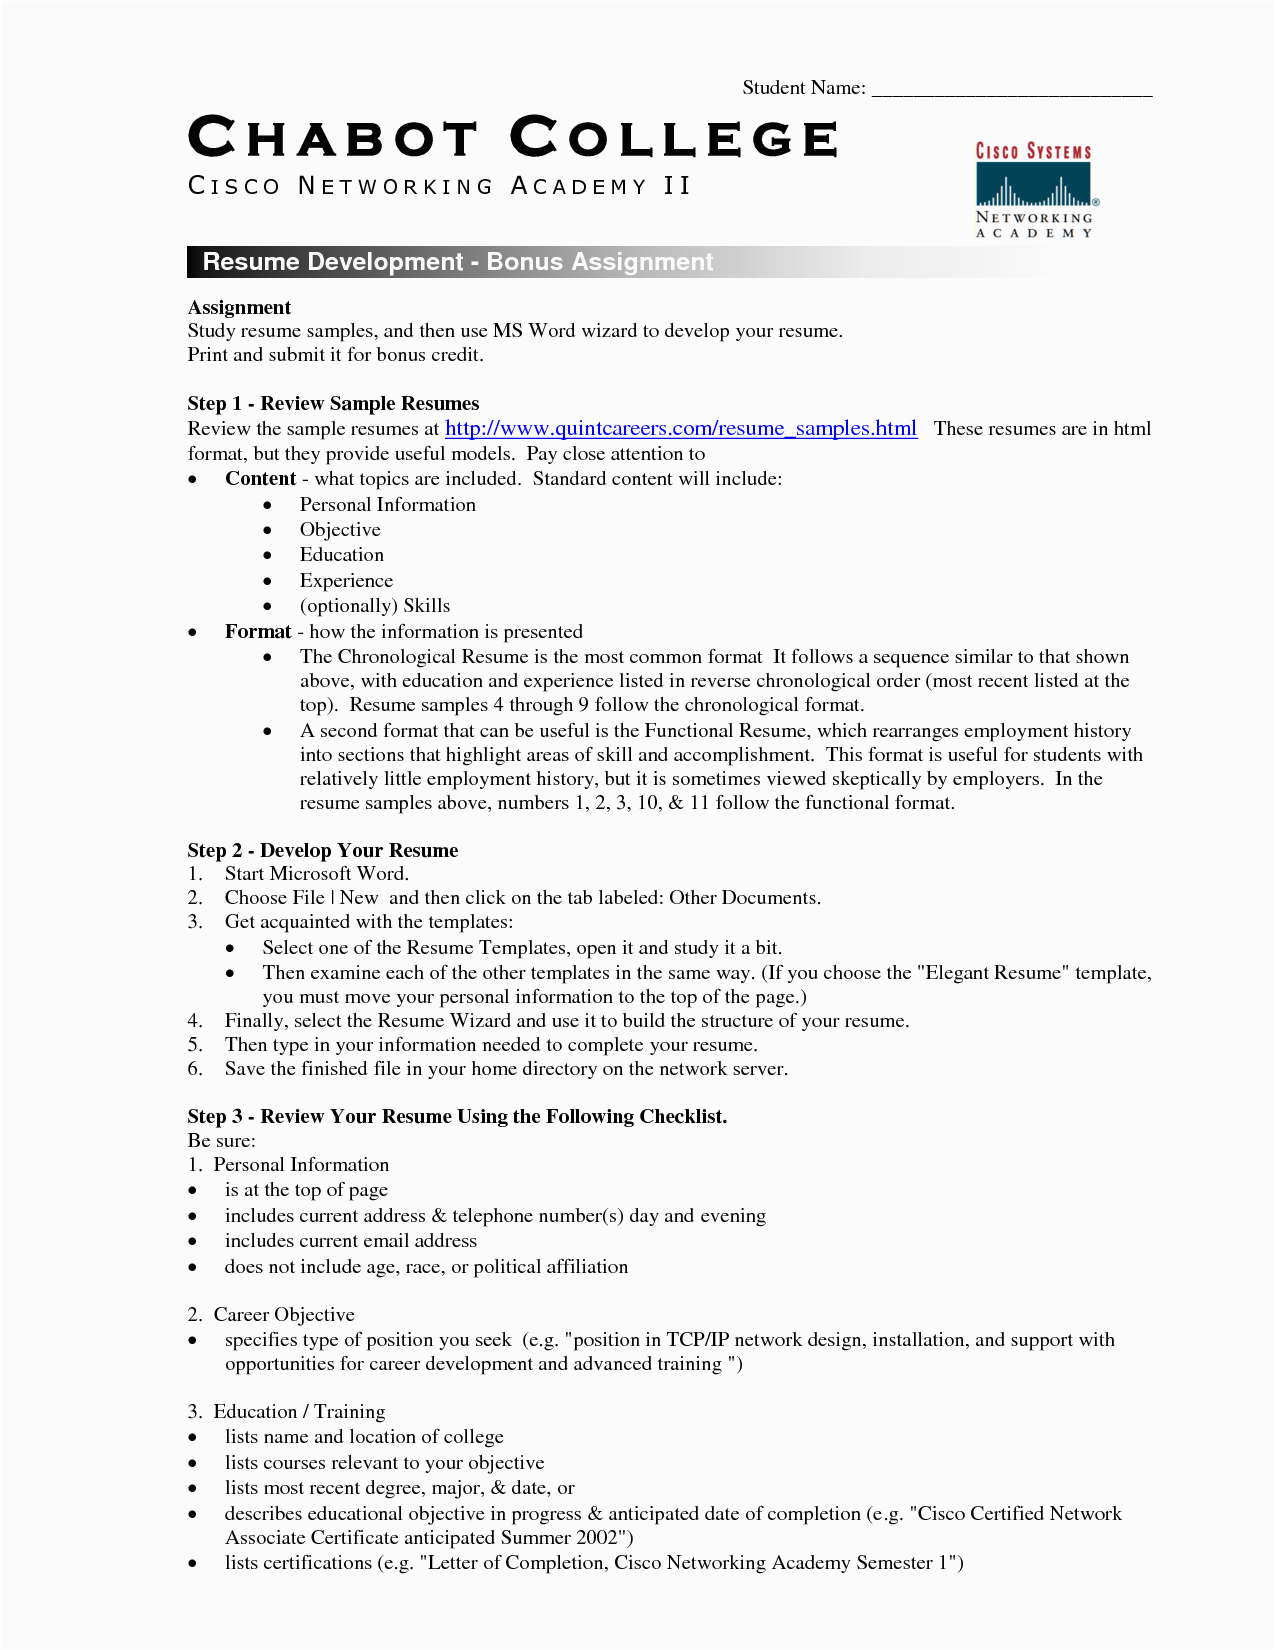 Download Resume Templates for College Students College Student Resume Template Microsoft Word – Task List